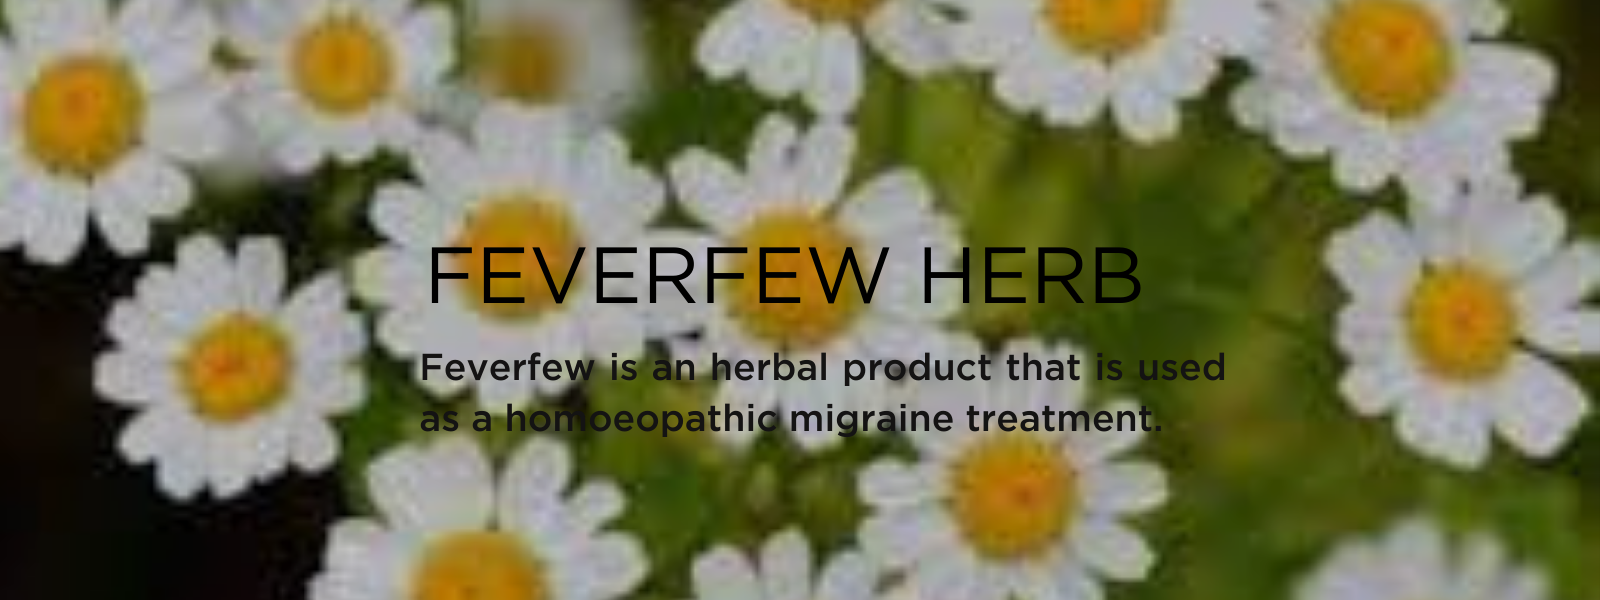 Feverfew- Health Benefits, Uses and Important Facts